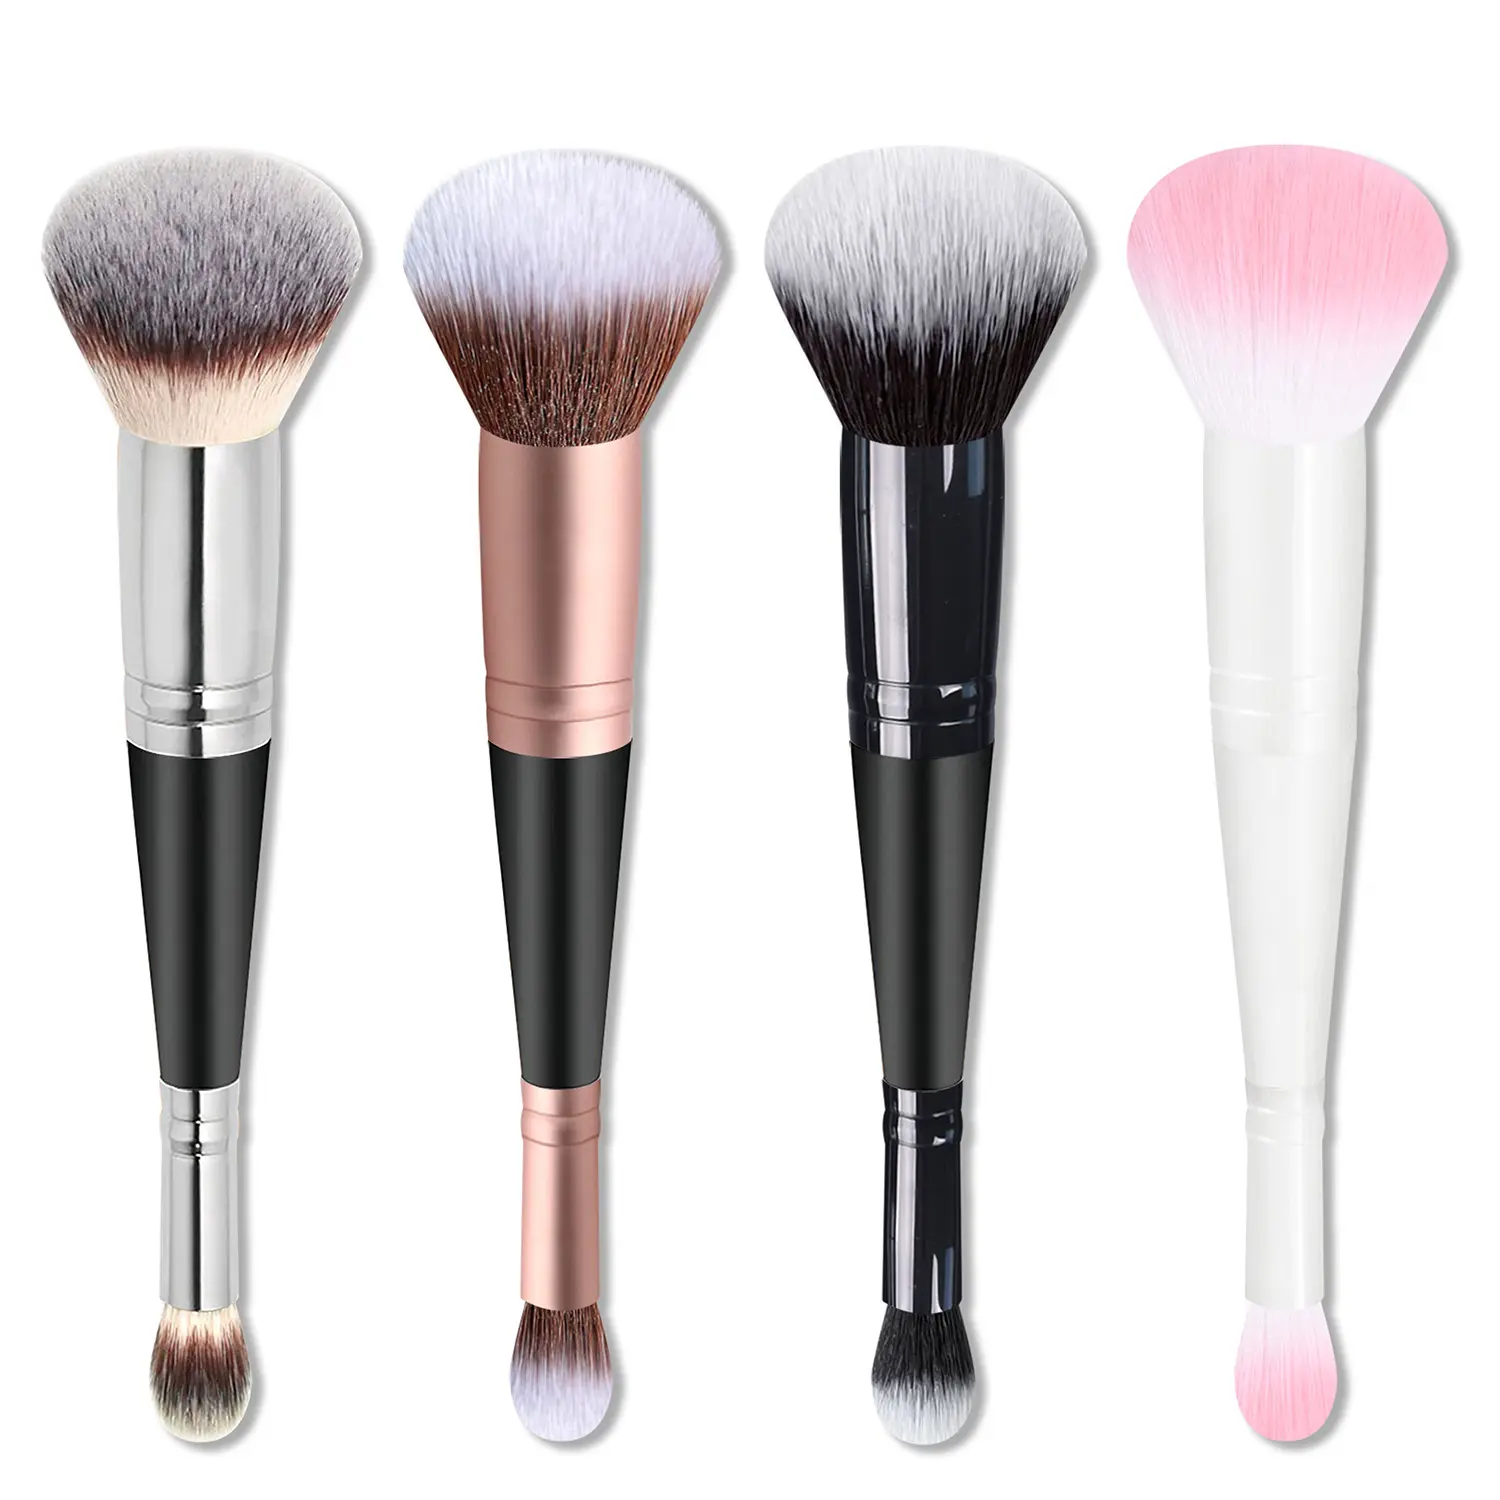 Air brush foundation makeup silicone mall bedazzled convenient 2 in 1 single makeup brush and sponge cleaner